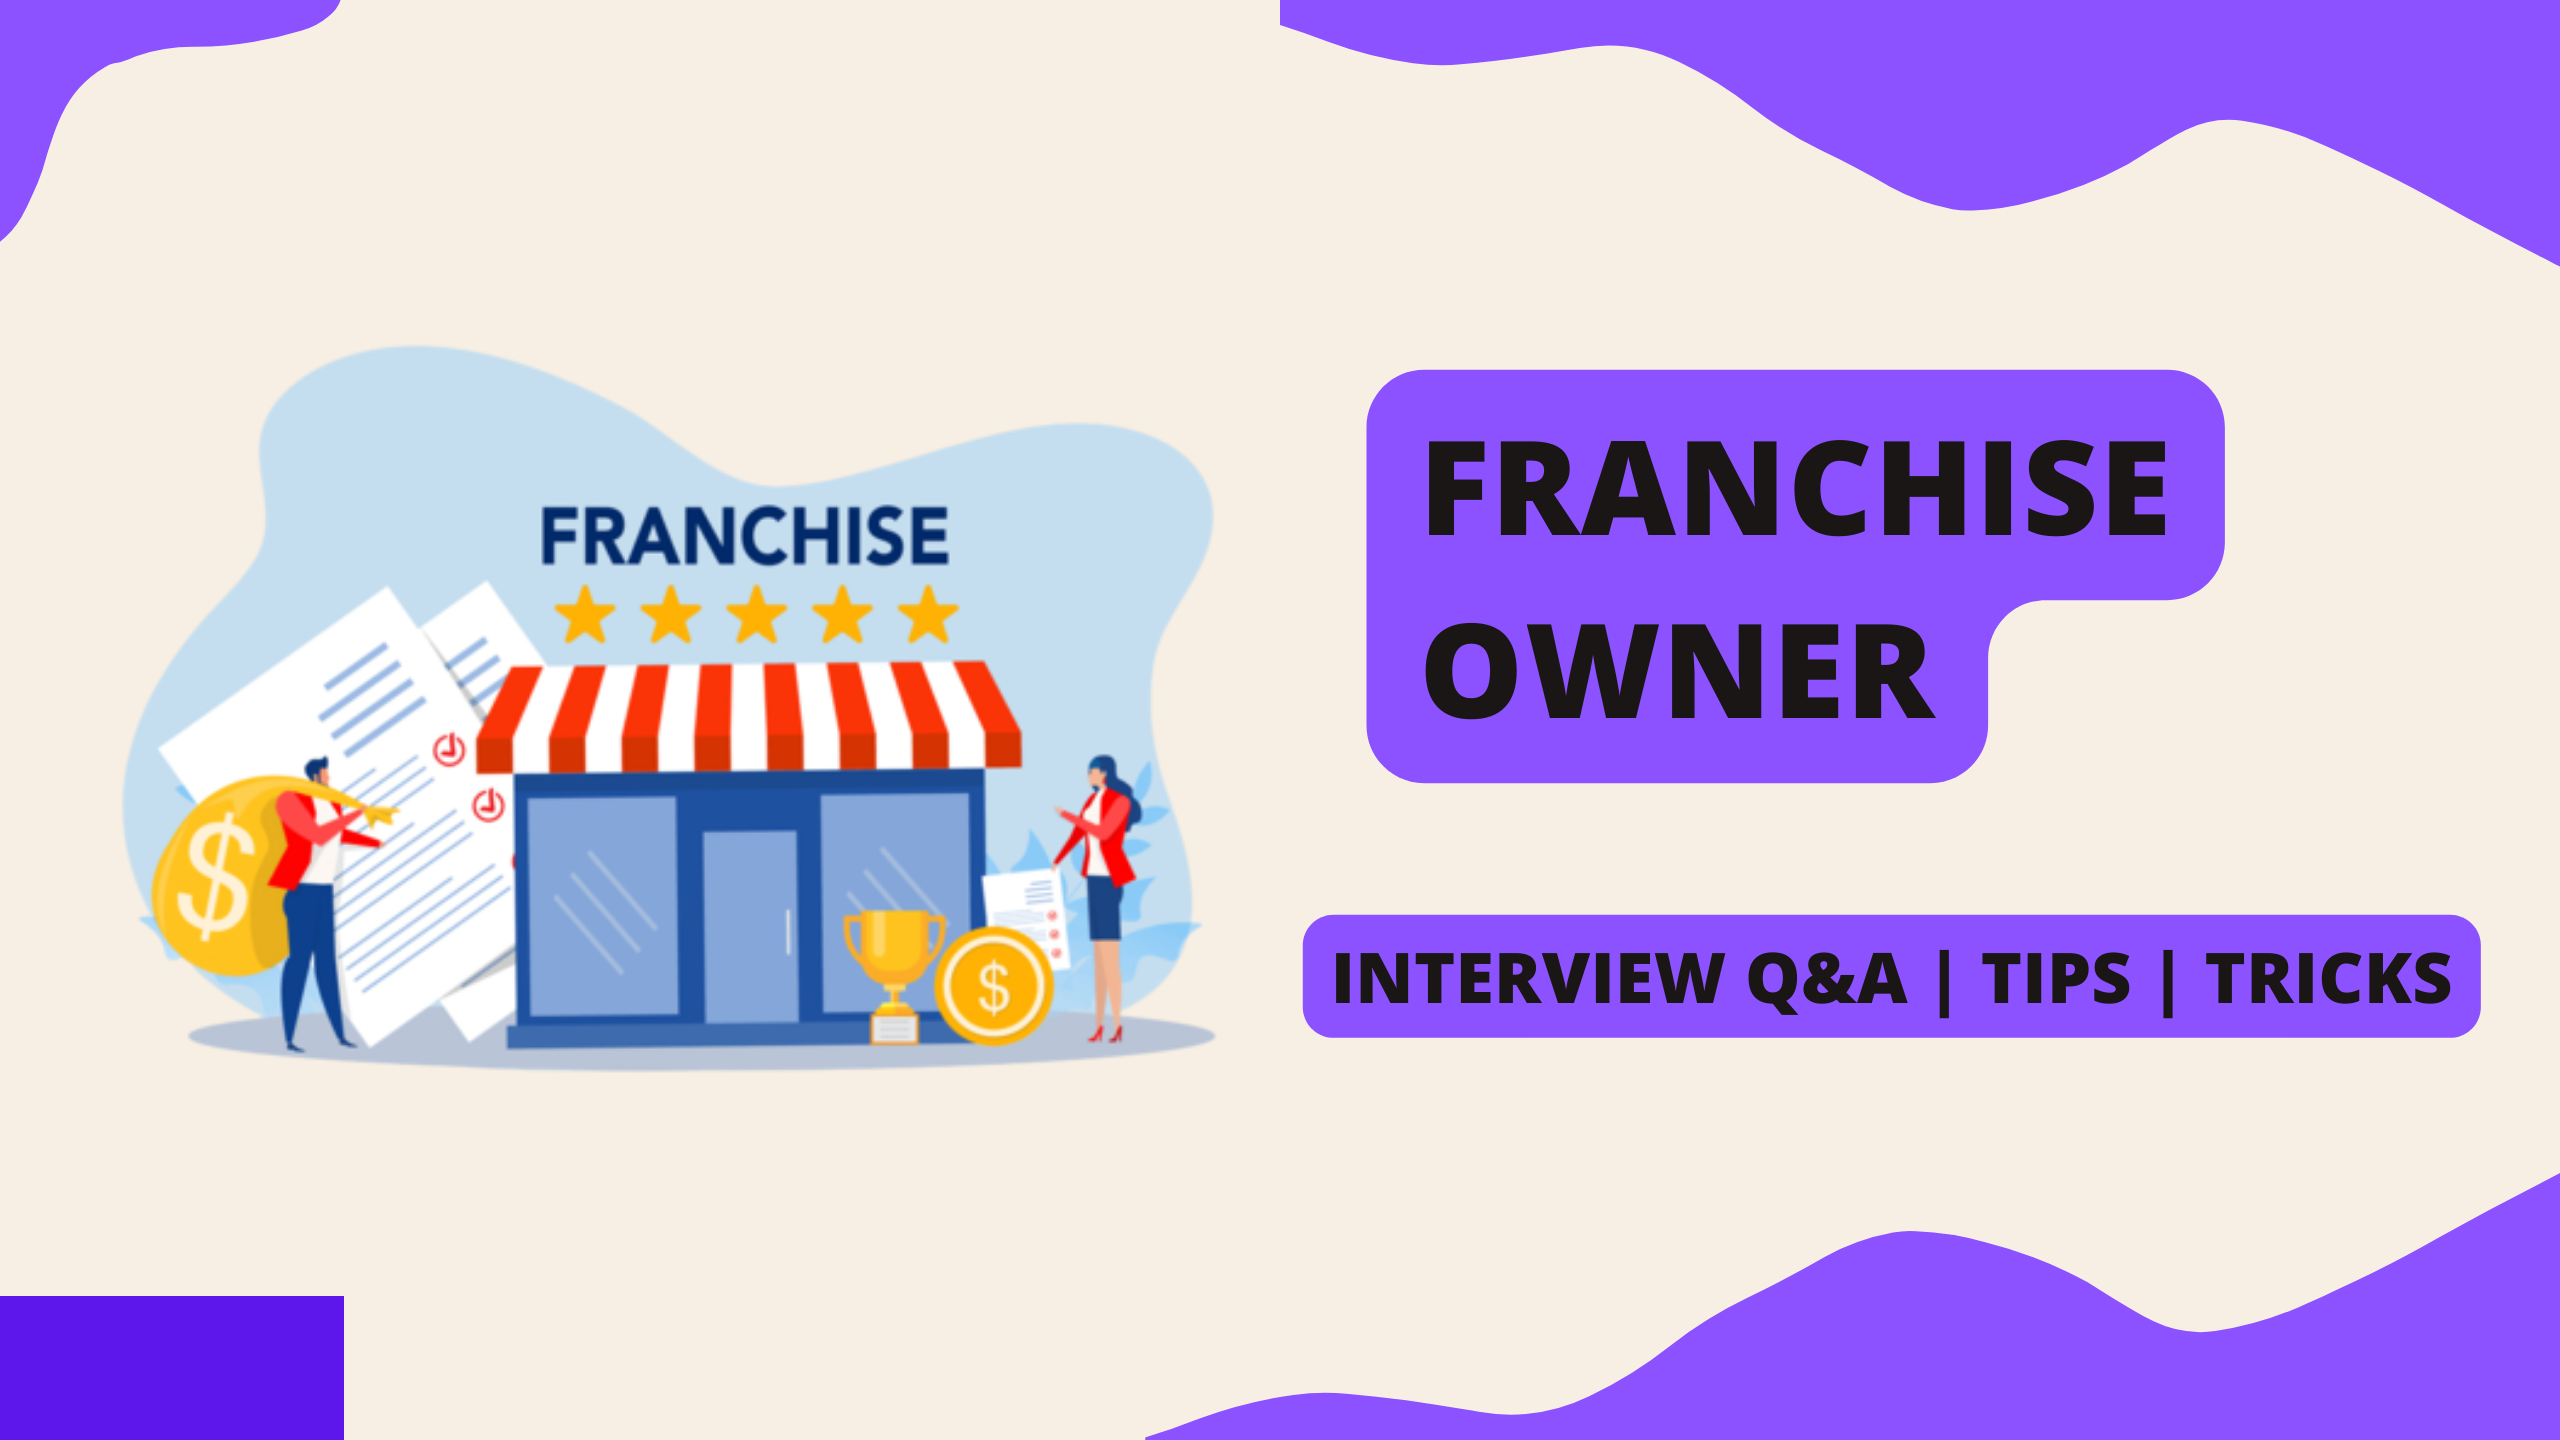 How to Prepare for the Franchise Owner Interview in South Africa? Q&A with Examples